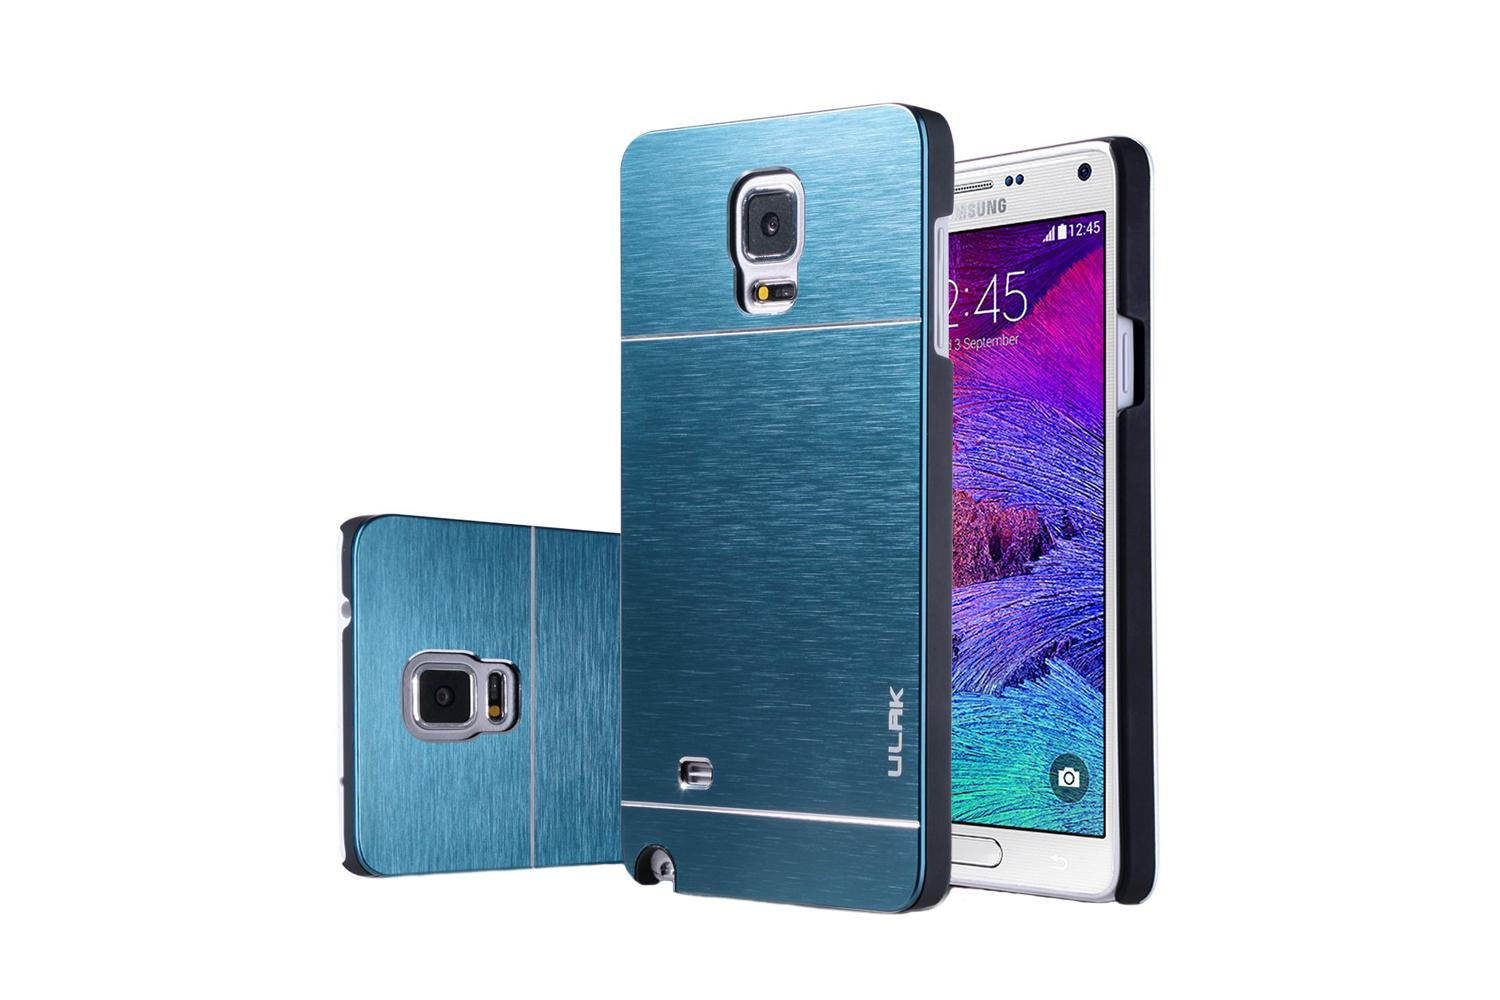 15 Galaxy Note 4 and Covers Digital Trends